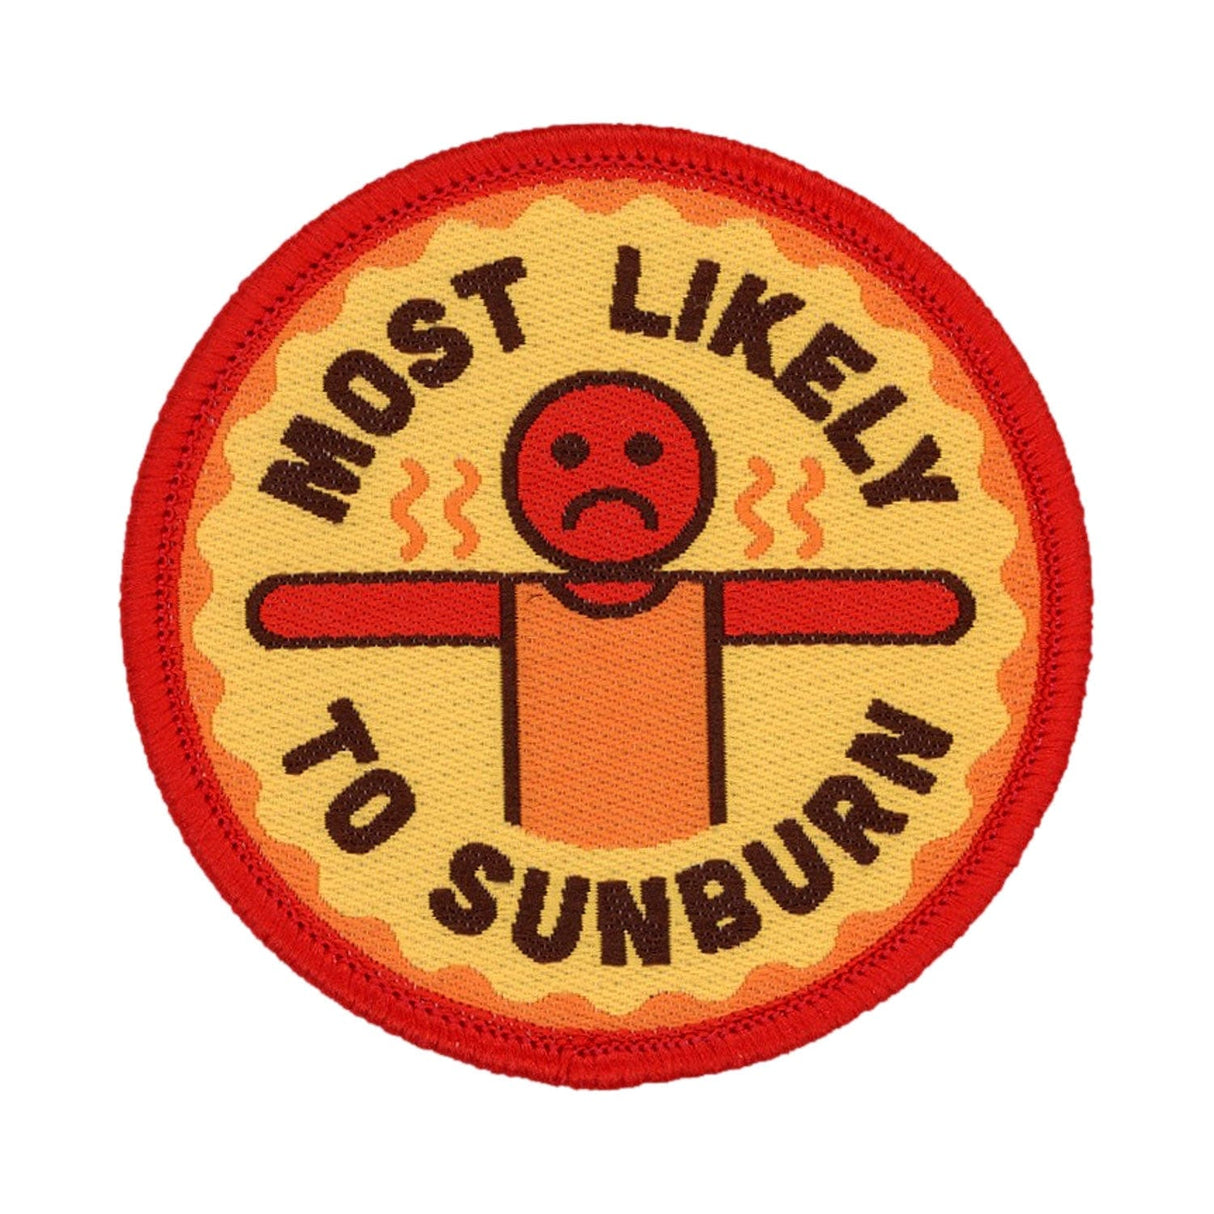 Most Likely to Sunburn Patch